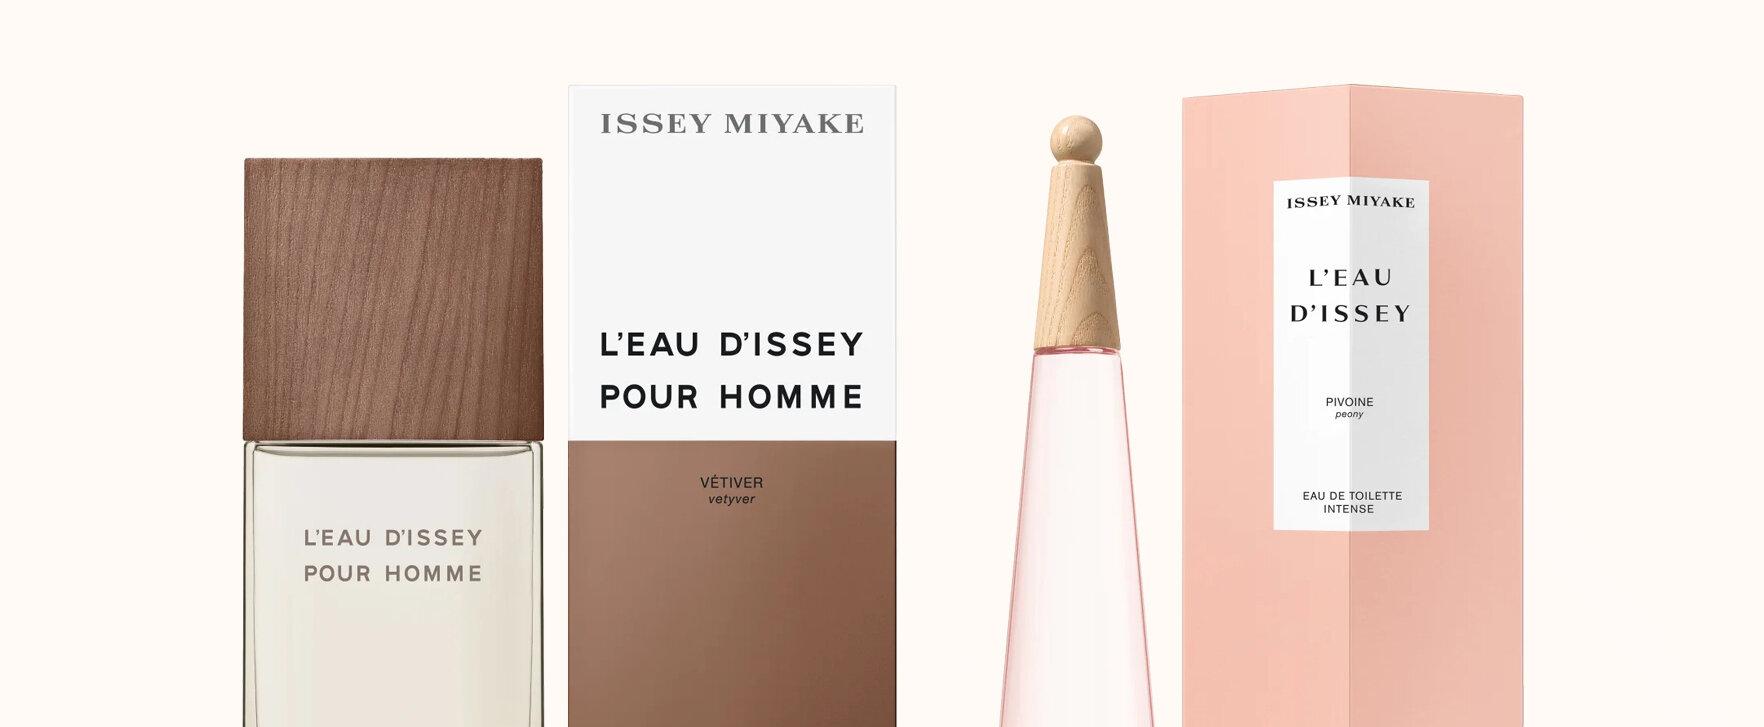 Issey Miyake Celebrates 30th Anniversary With New Fragrance Creations “L’Eau d’Issey Pivoine” and “L’Eau d’Issey Pour Homme Vétiver”